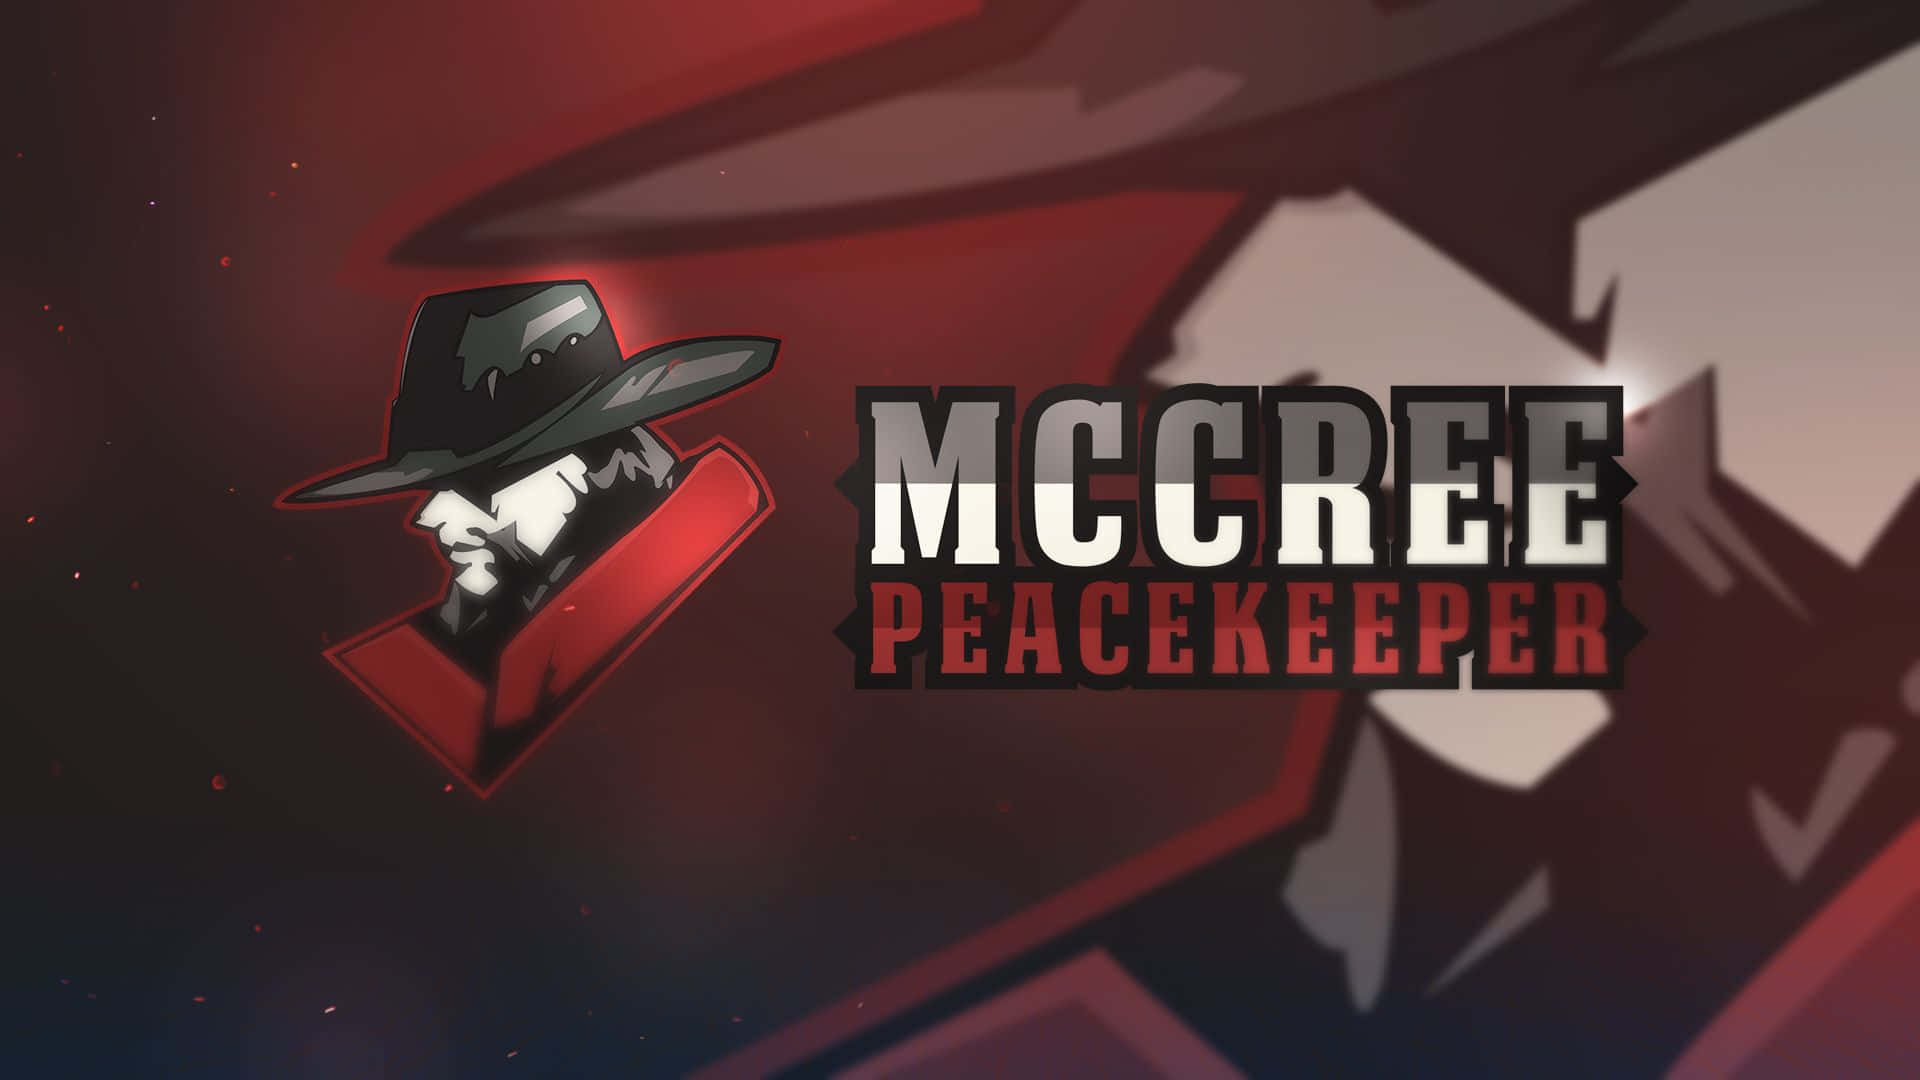 Sharpshooter Mccree Ready for Action Wallpaper